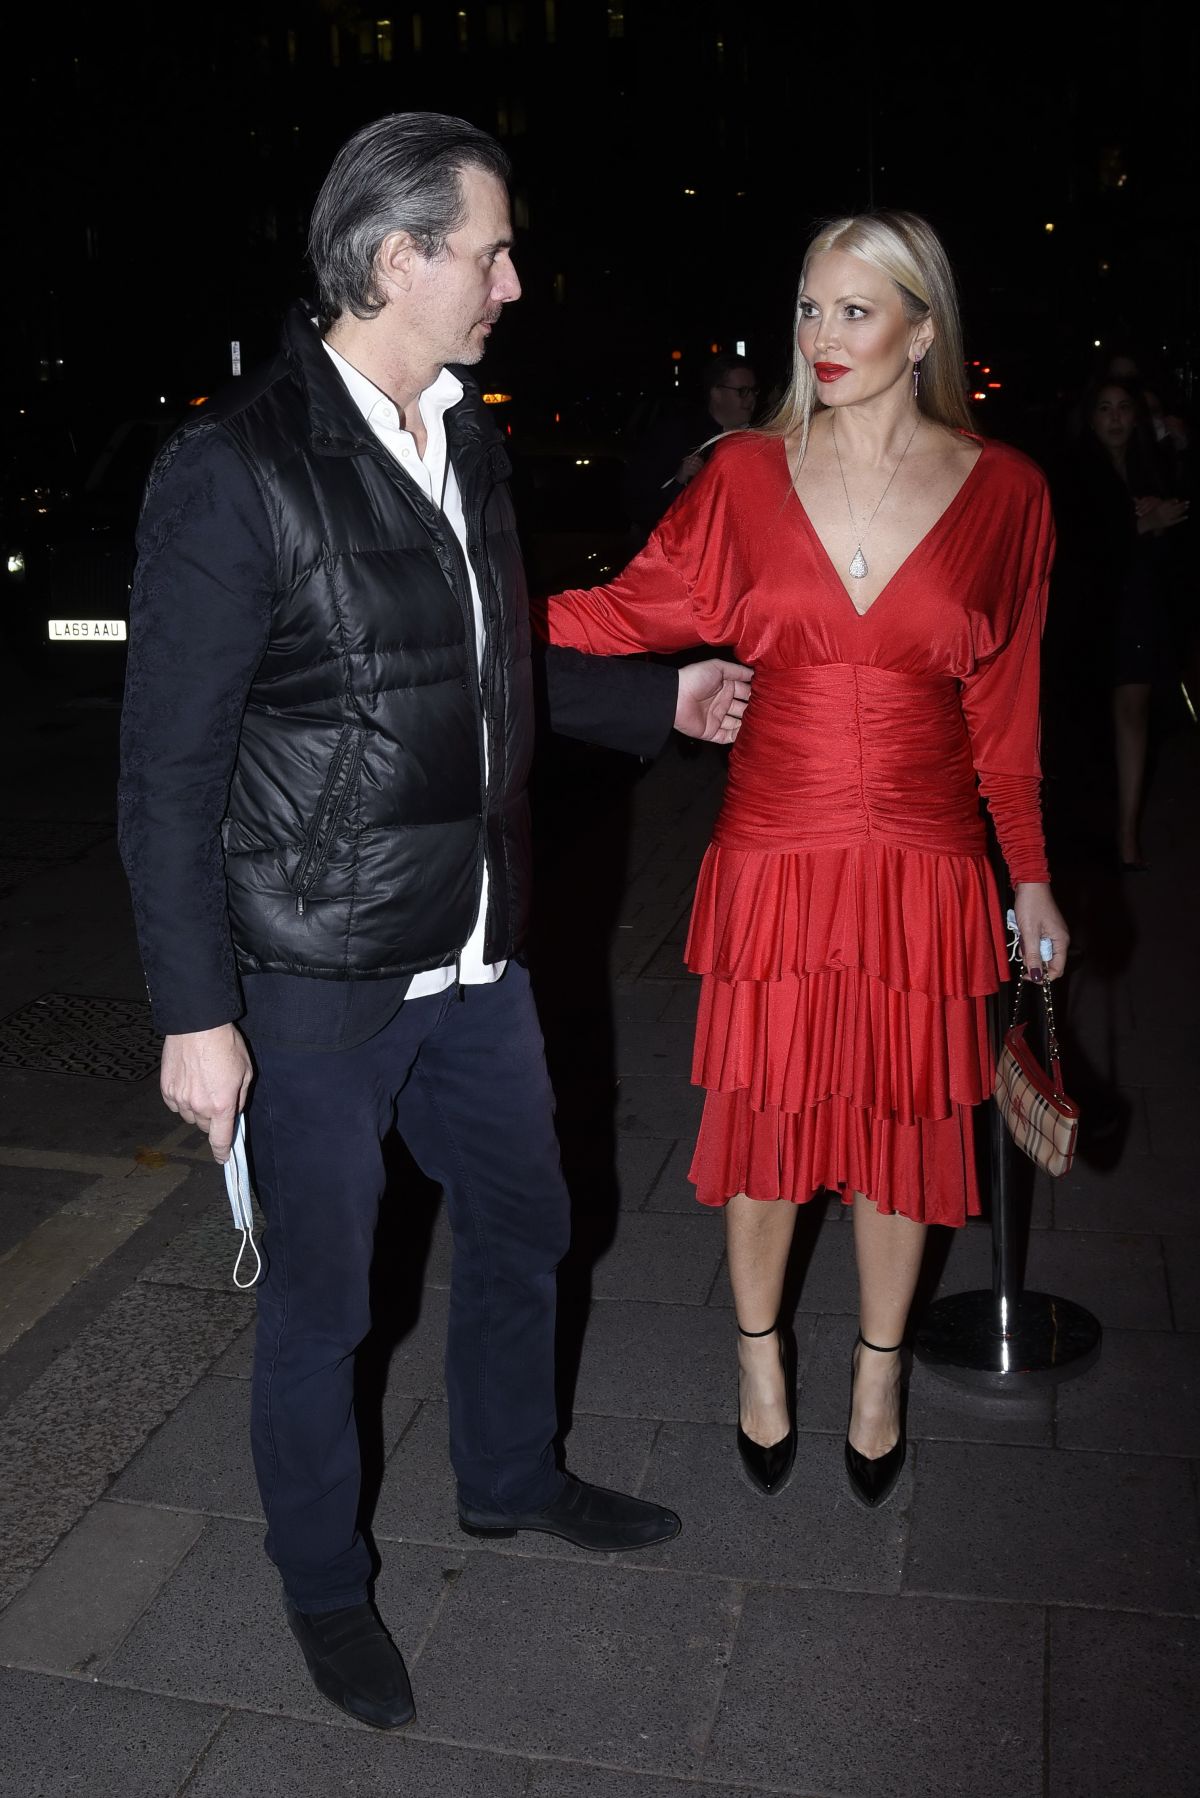 caprice-bourret-in-a-red-dress-at-annabel-s-club-in-london-12-10-2020-3.jpg